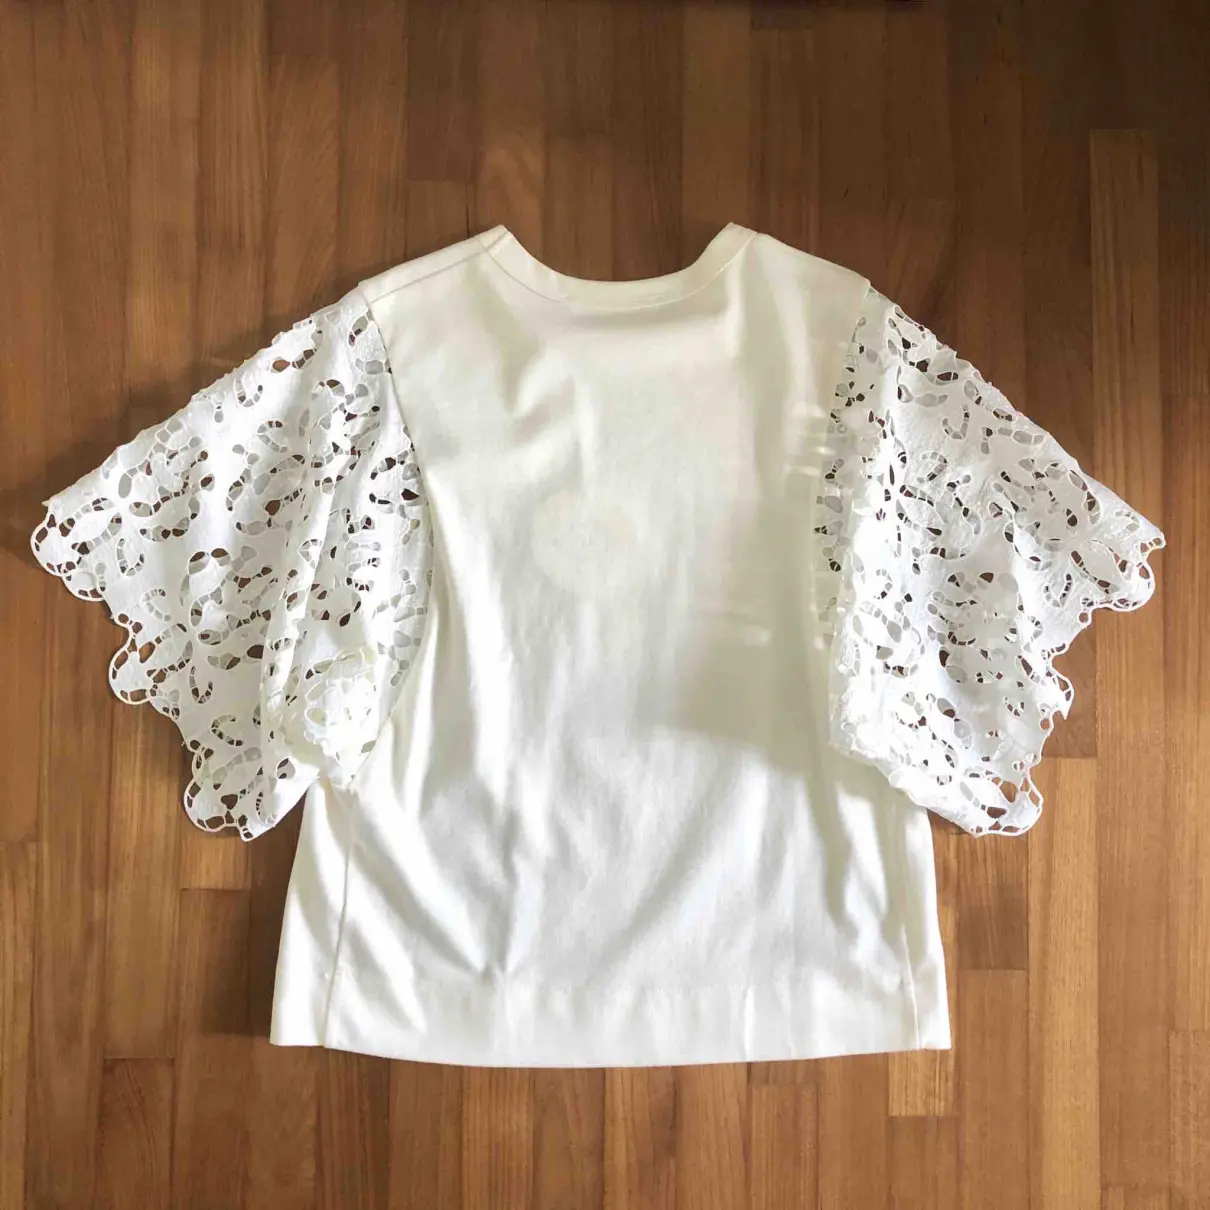 Buy See by Chloé White Cotton Top online